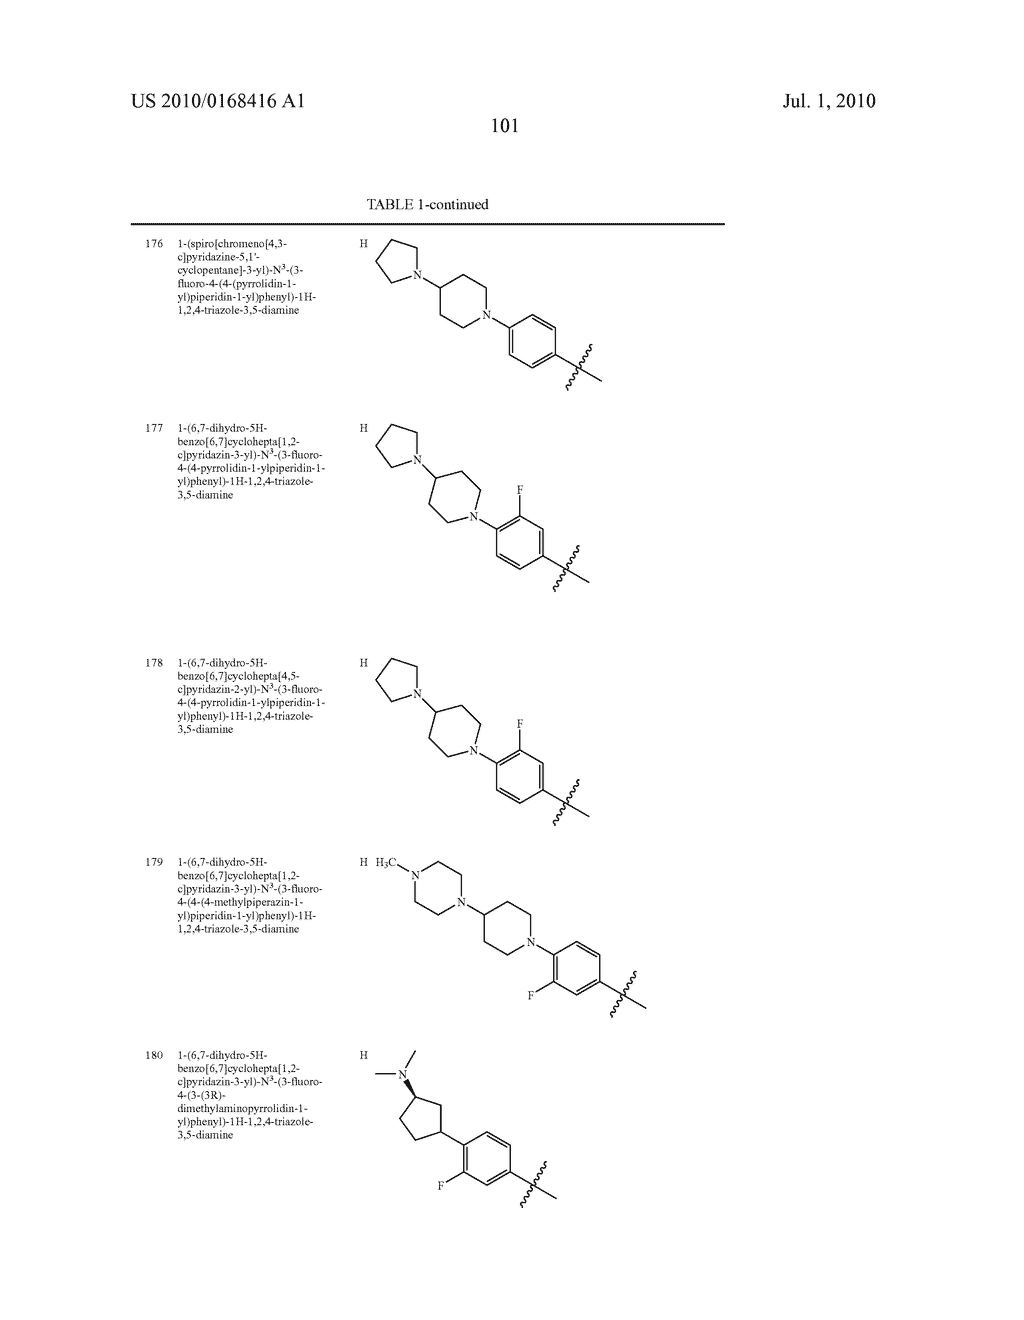 POLYCYCLIC HETEROARYL SUBSTITUTED TRIAZOLES USEFUL AS AXL INHIBITORS - diagram, schematic, and image 102